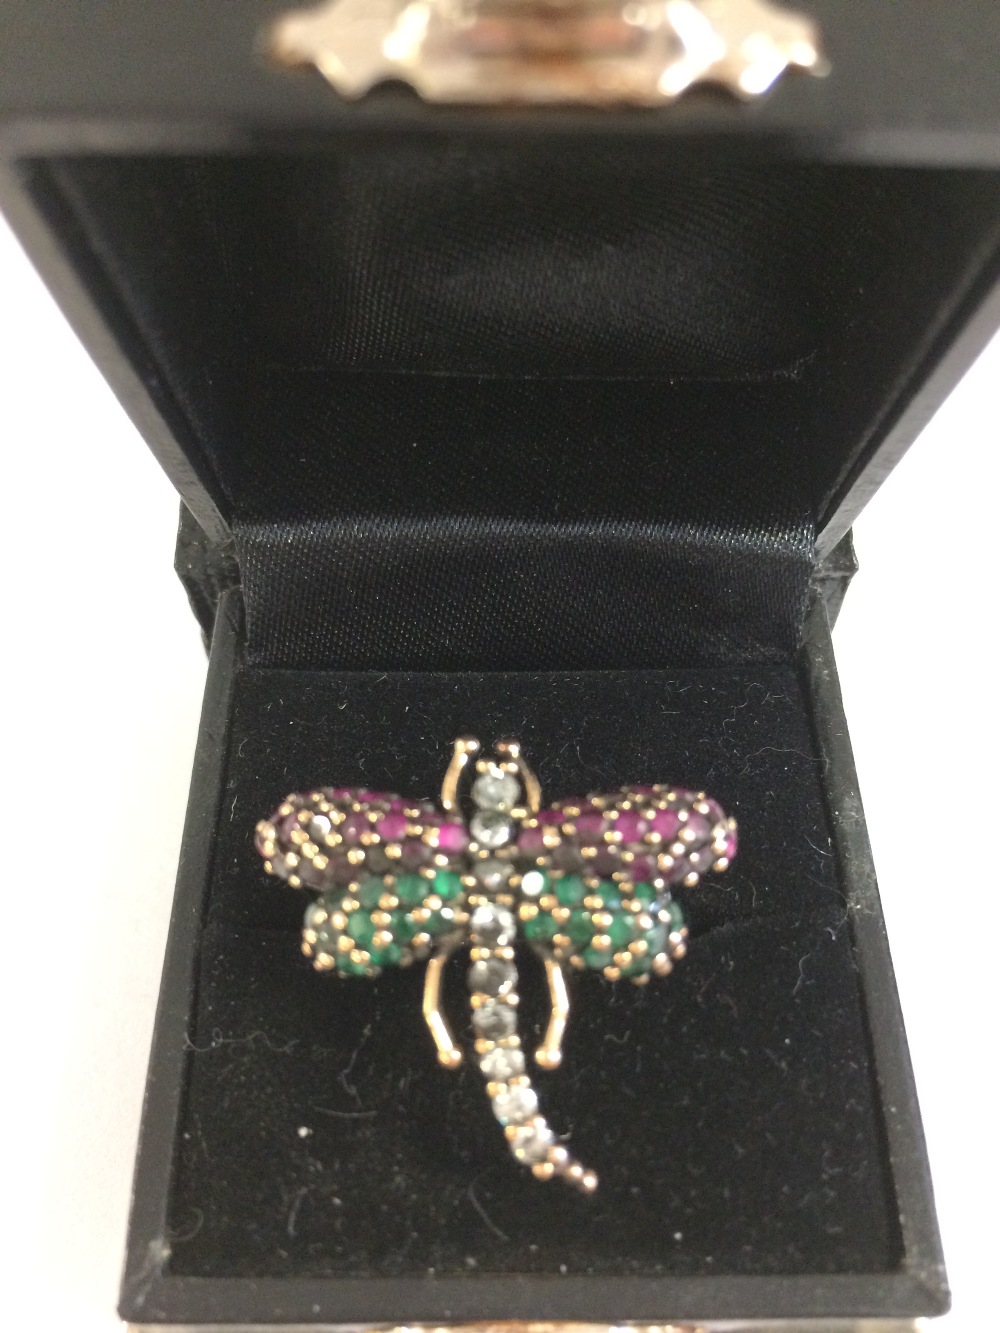 Silver ring in the form of a dragonfly